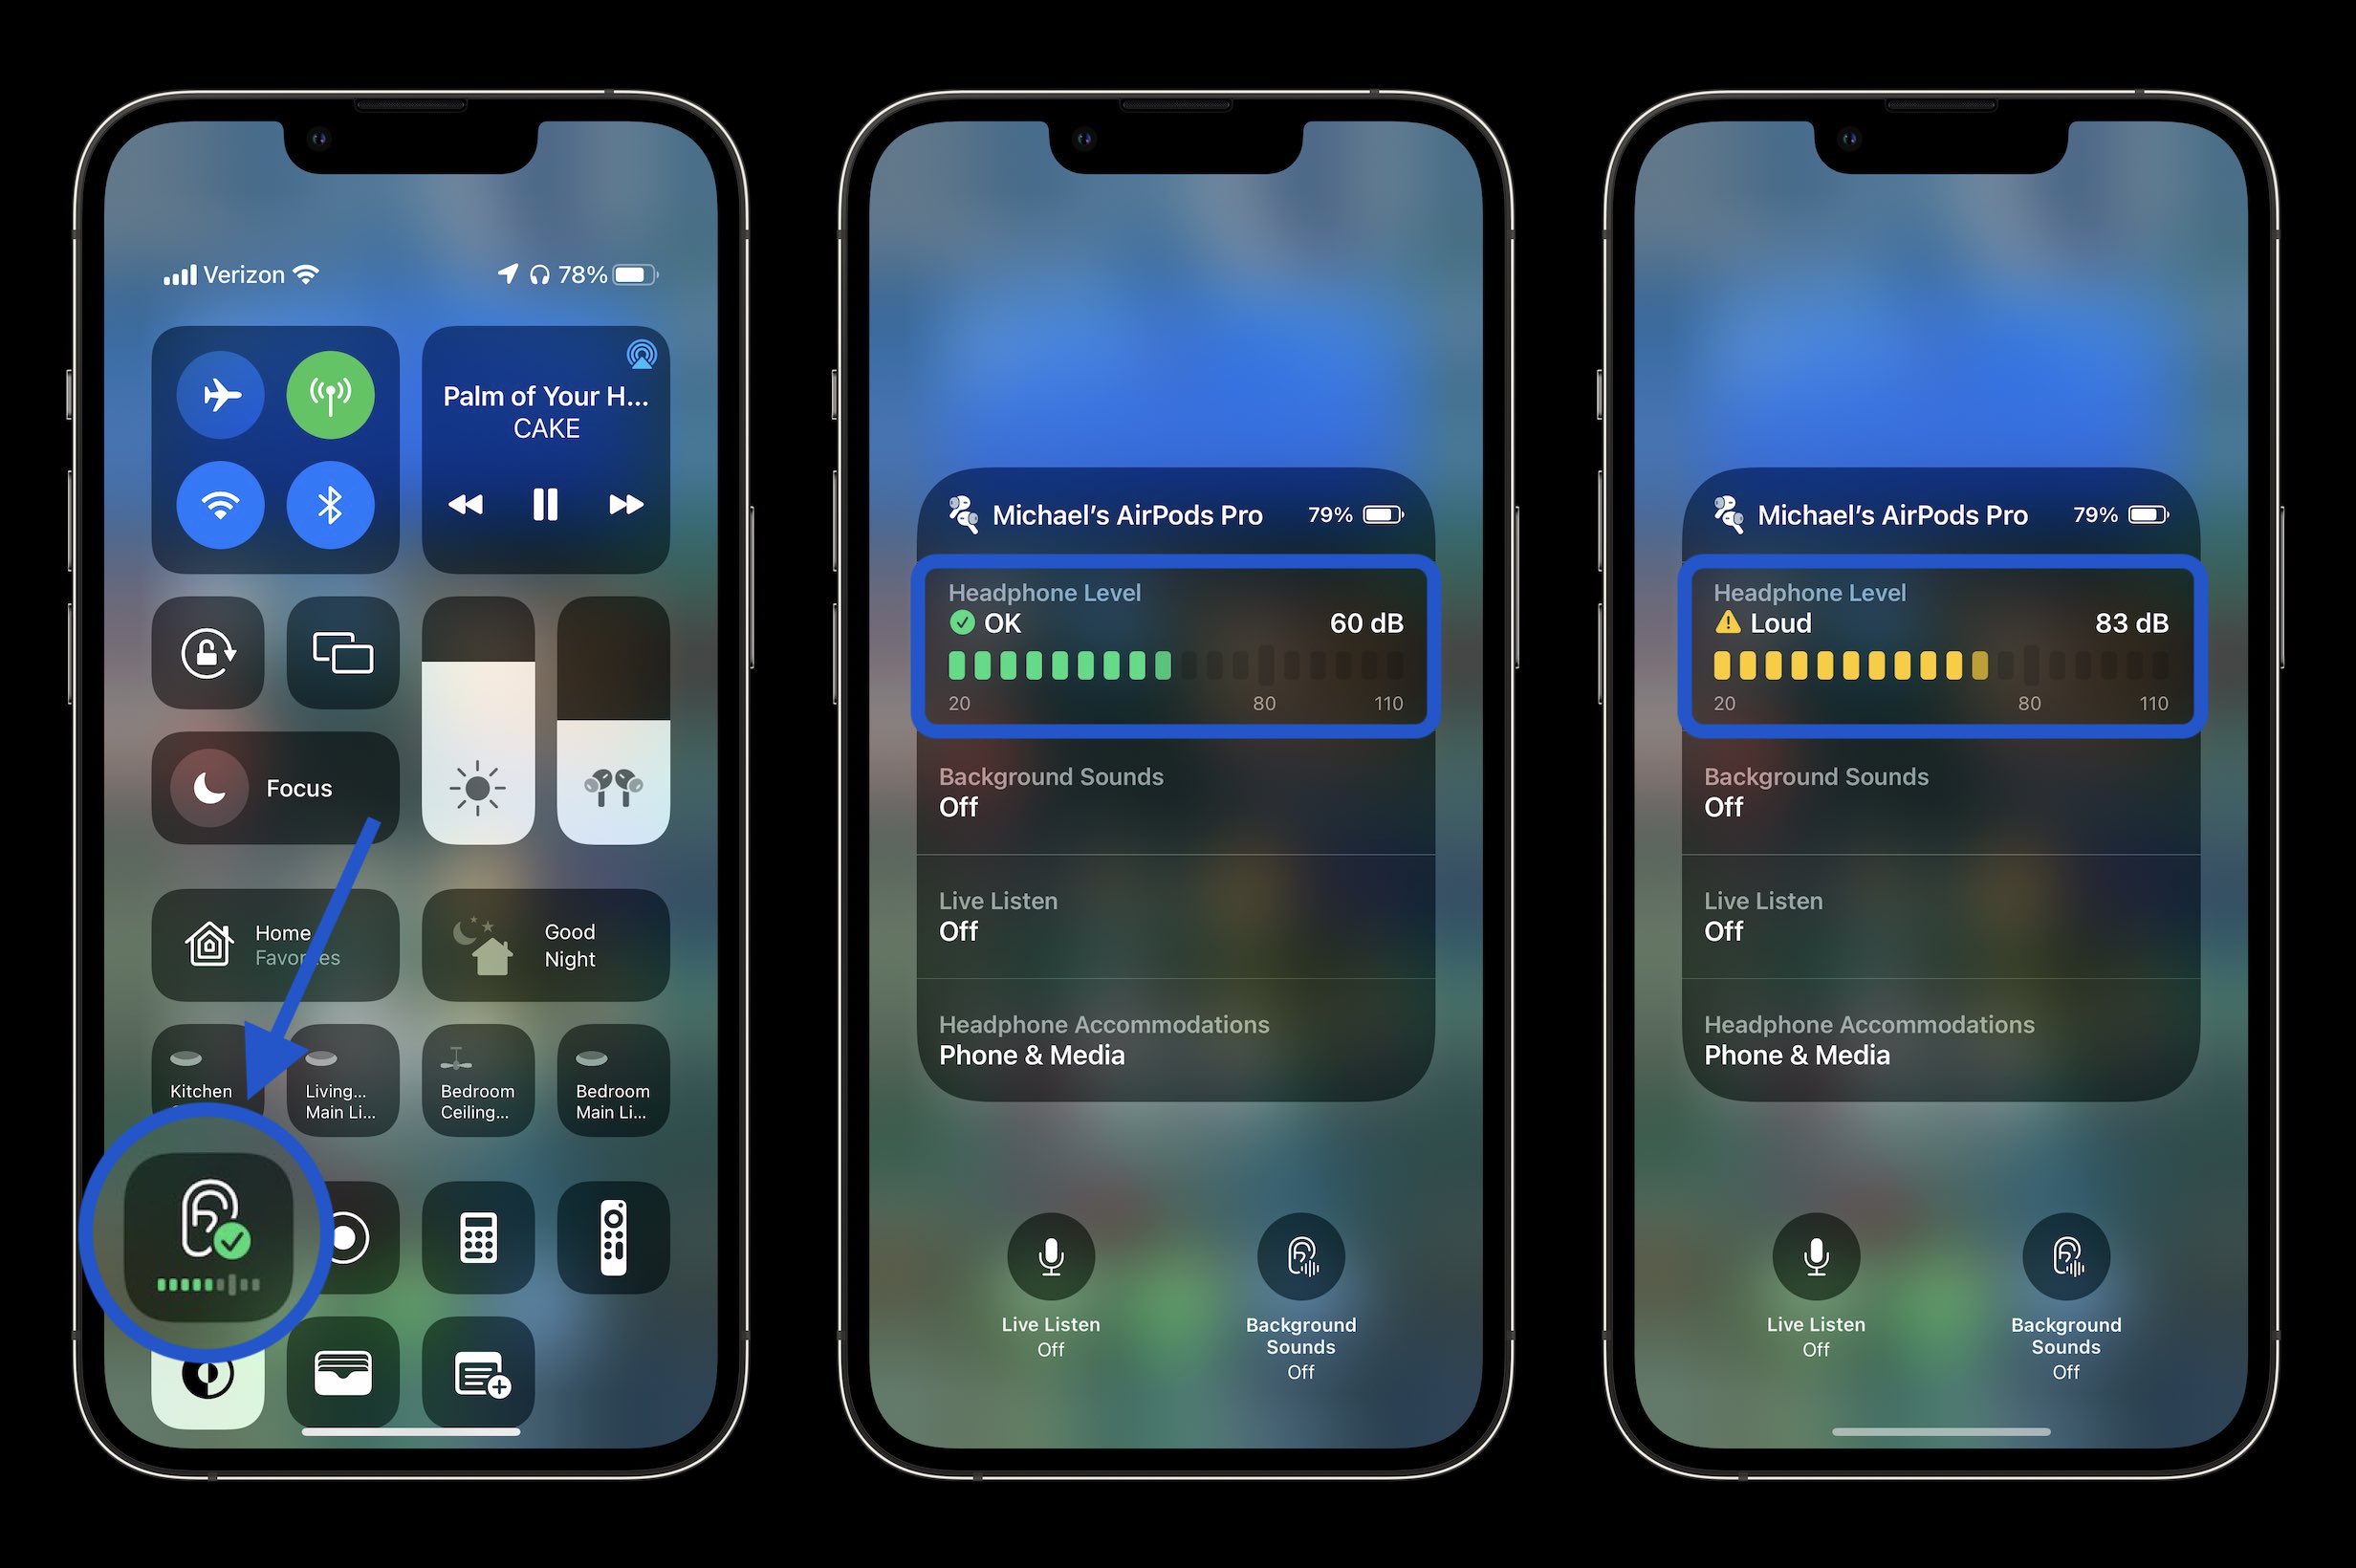 How to check decibel levels with iPhone and Apple Watch - Open Control Center on iPhone > look for Ear icon tile